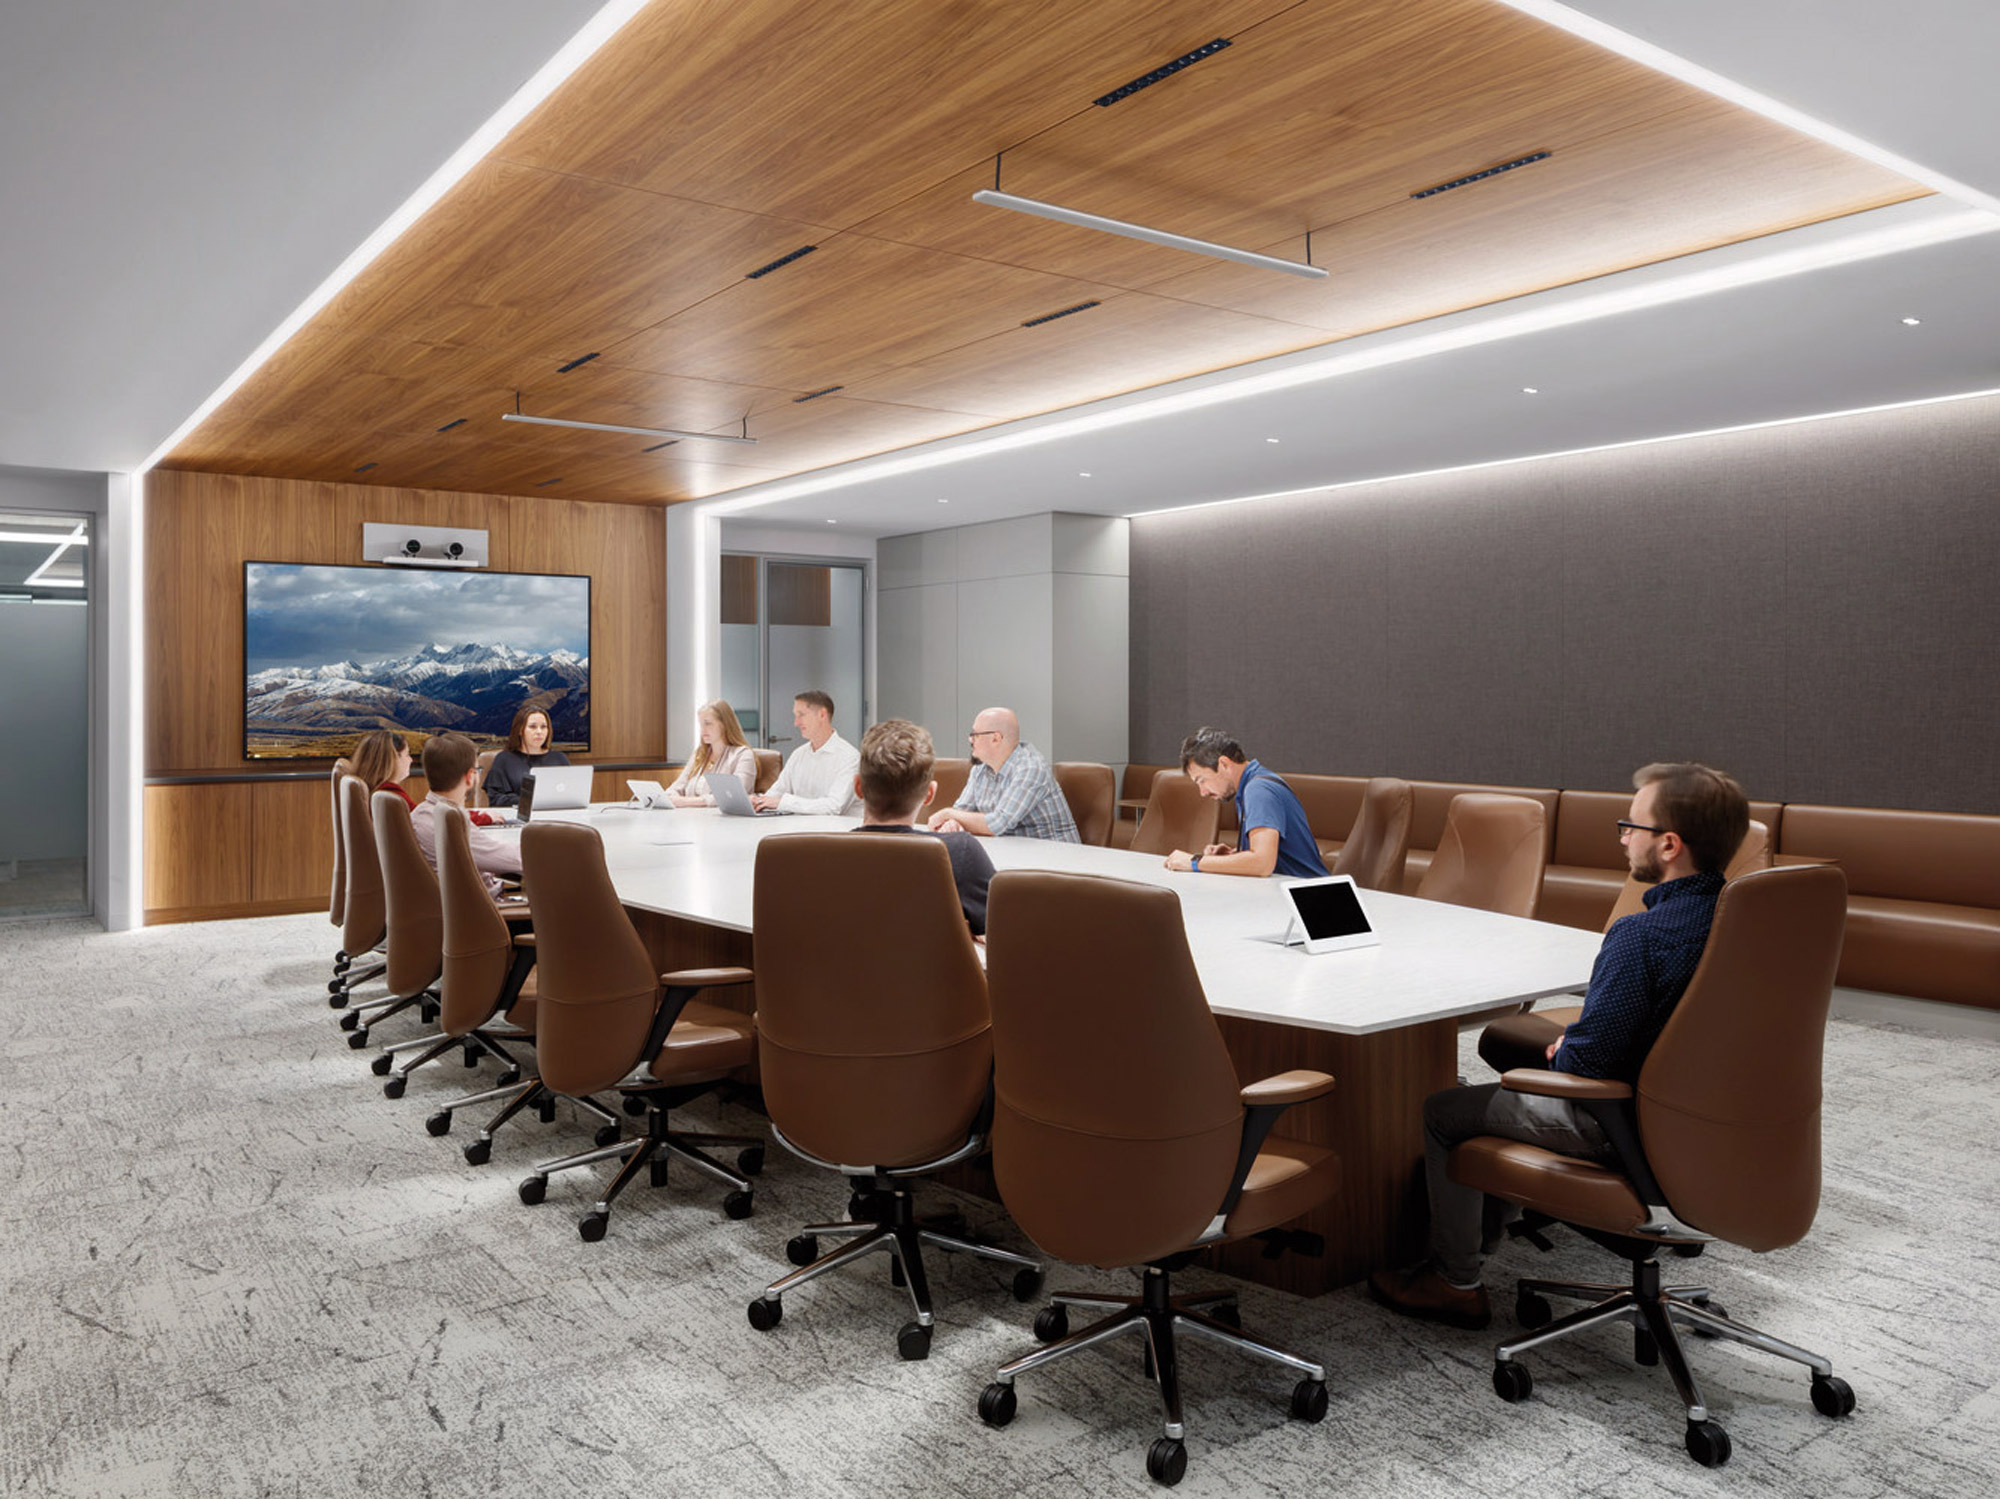 Modern conference room with a sleek, elongated table, leather chairs, and a recessed ceiling with warm wood accents. Ambient lighting complements the neutral color palette, while a large digital screen adorns the front wall, enhancing the collaborative workspace.